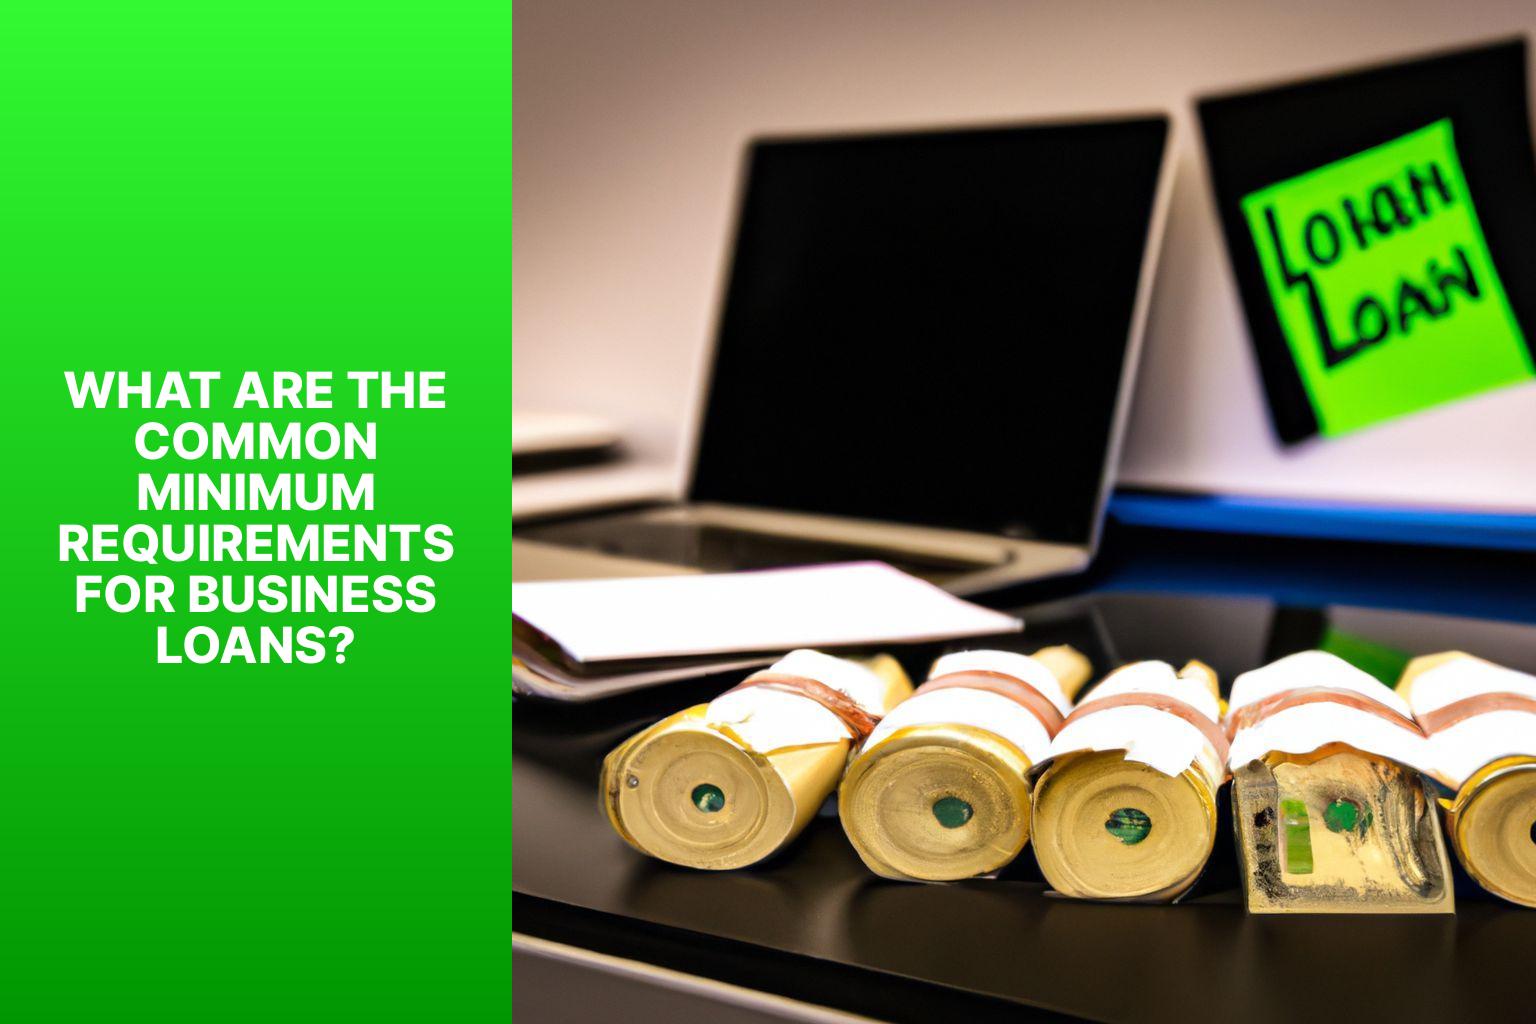 What are the Common Minimum Requirements for Business Loans? - Bare Minimum: Understanding Business Loan Minimum Requirements 